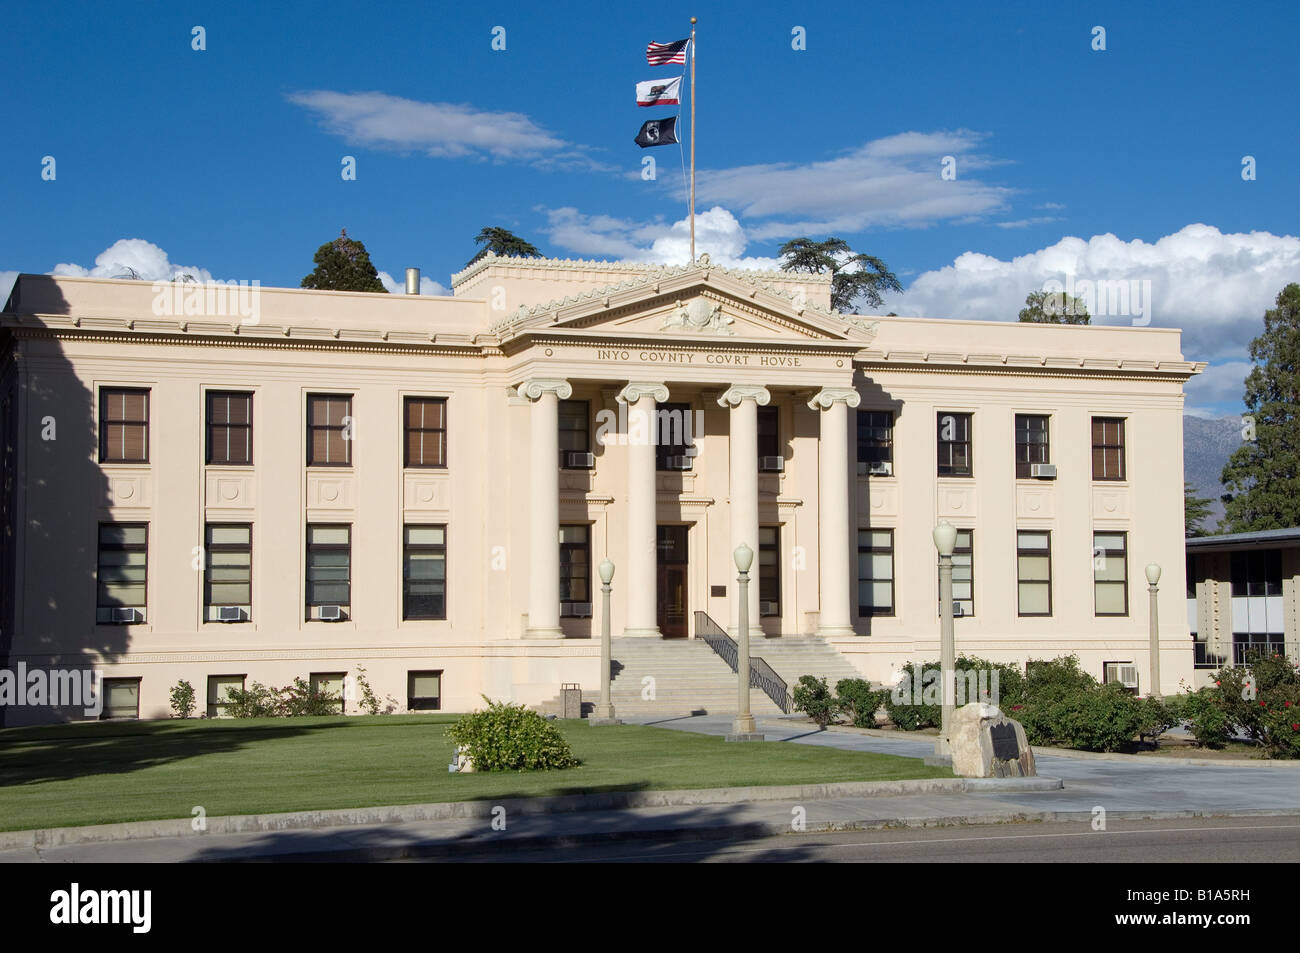 The Inyo County Courthouse at Independence, Ca, Stock Photo